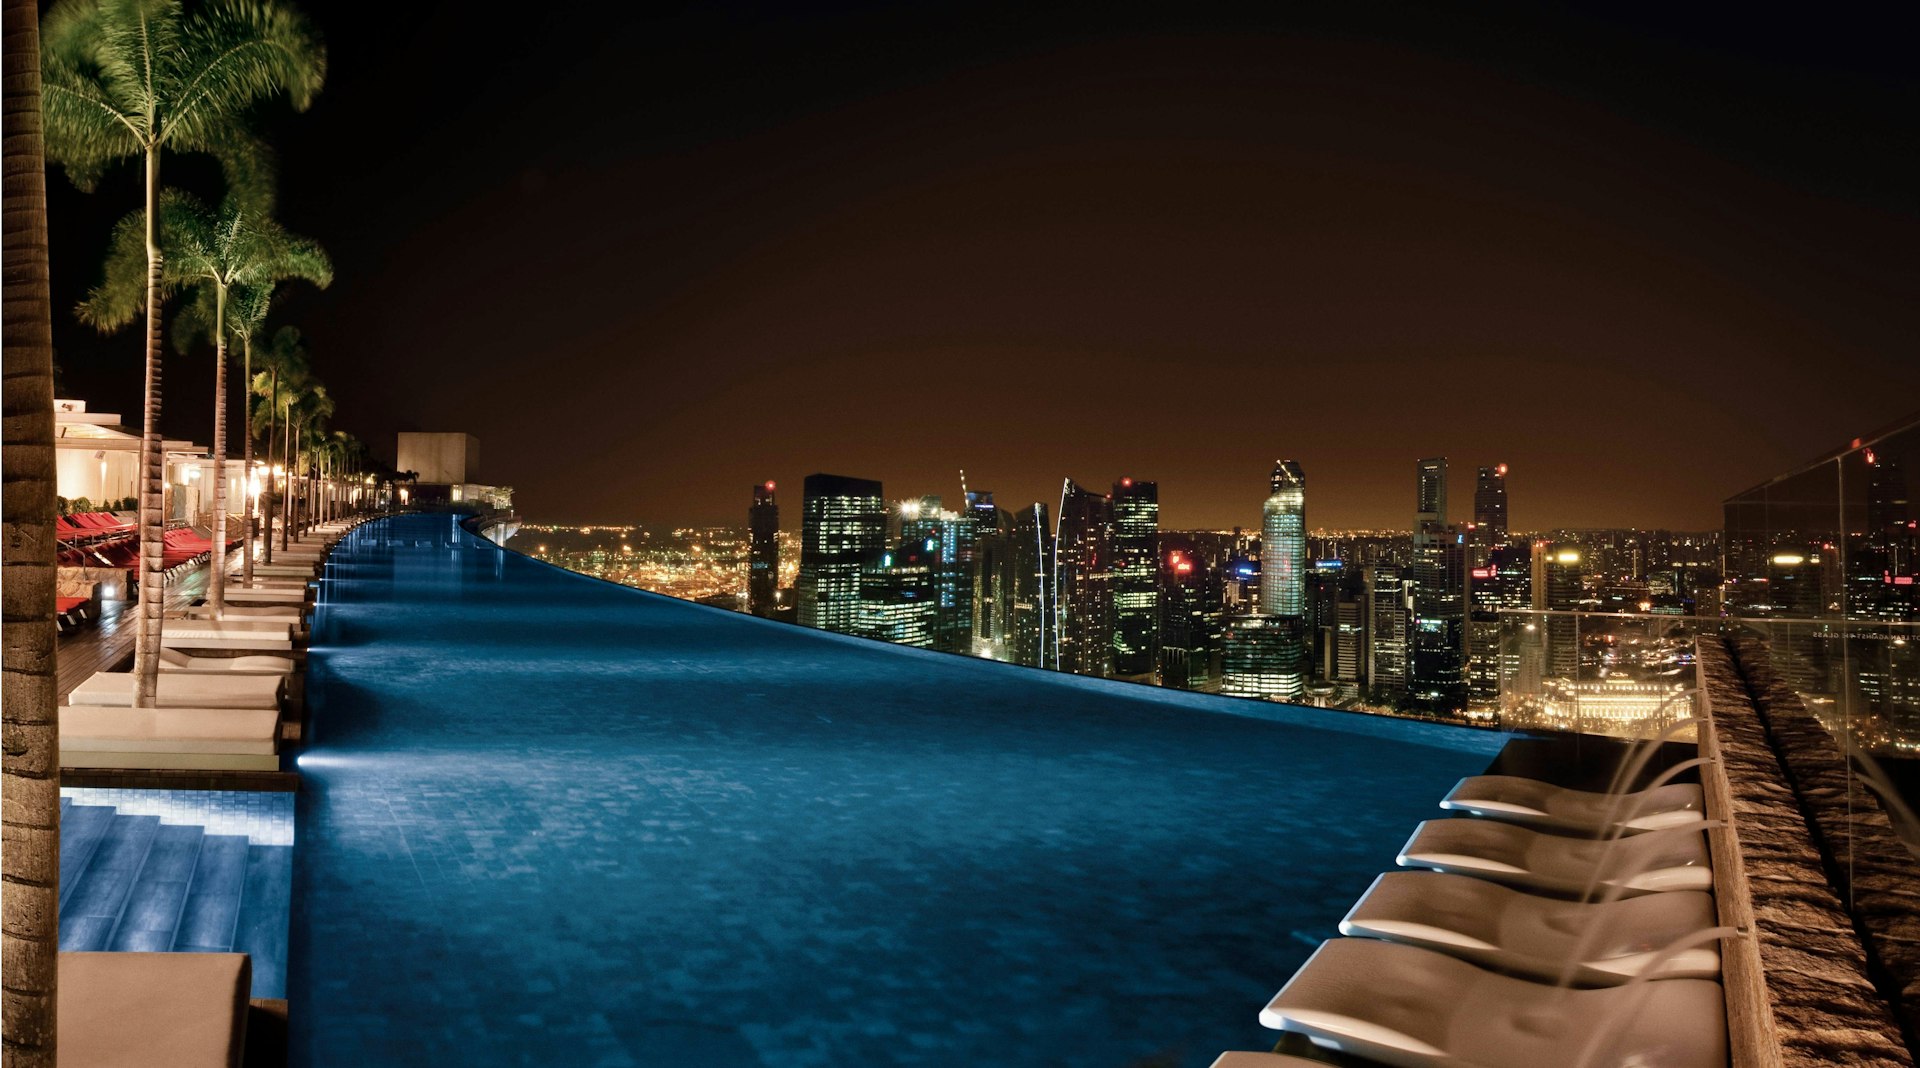 The rooftop pool at Marina Bay Sands Singapore